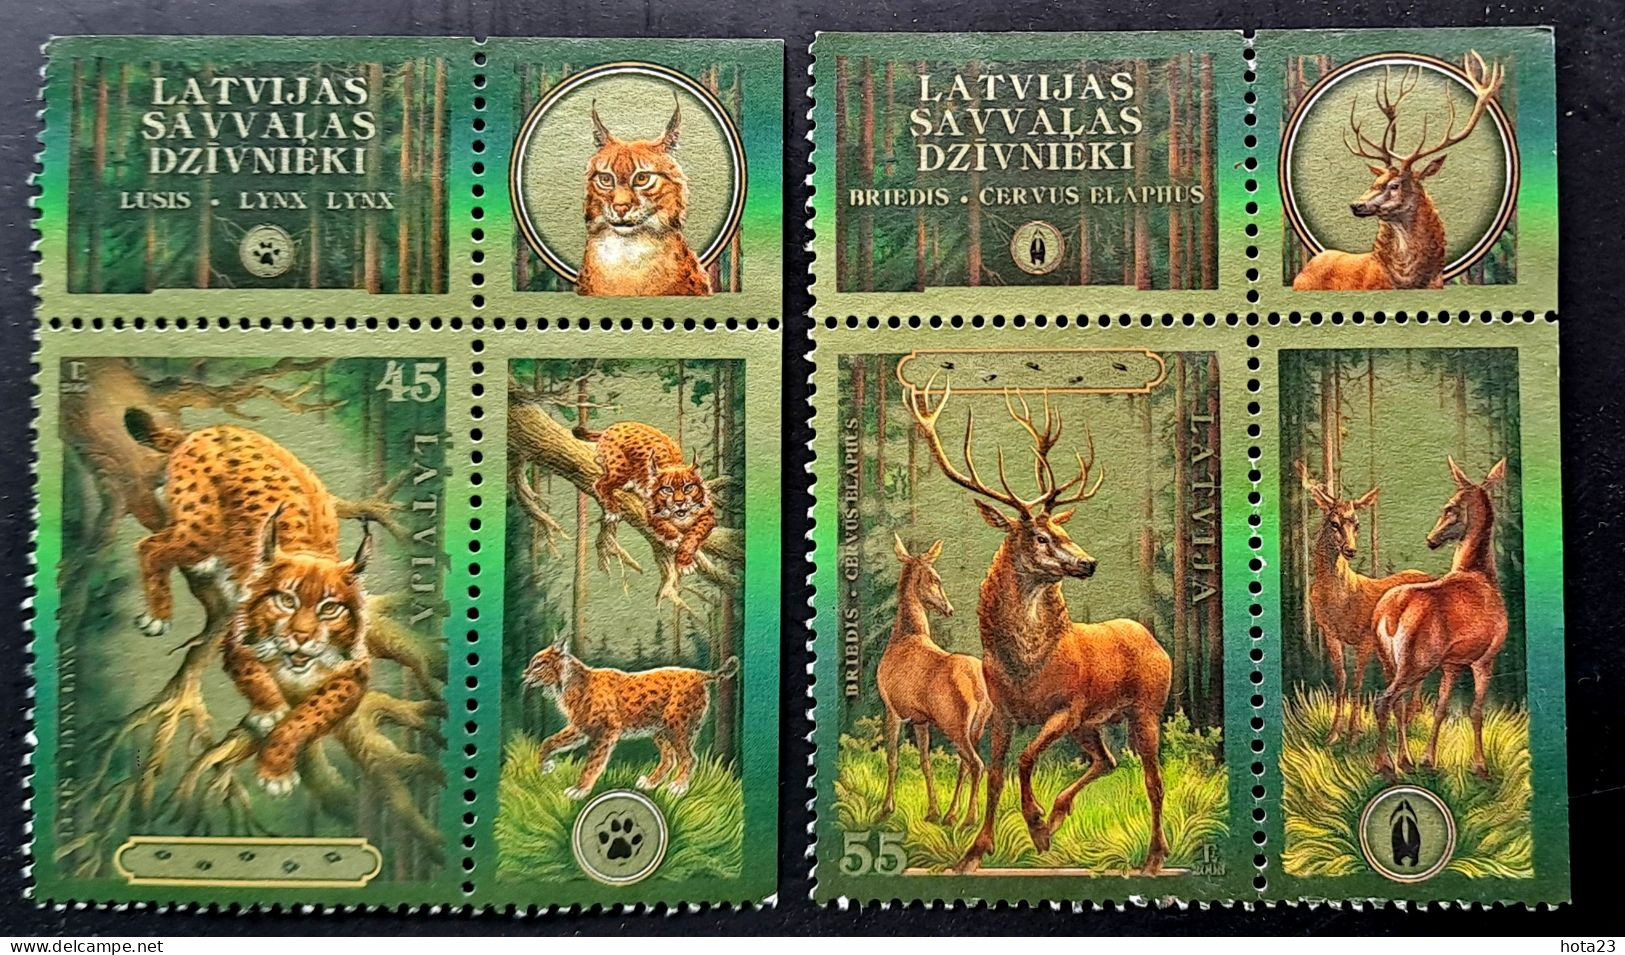 (!) LATVIA , Lettland , Lettonia - Lynx  AND STAG 2006  +2 BORDER - USED - Lettonie